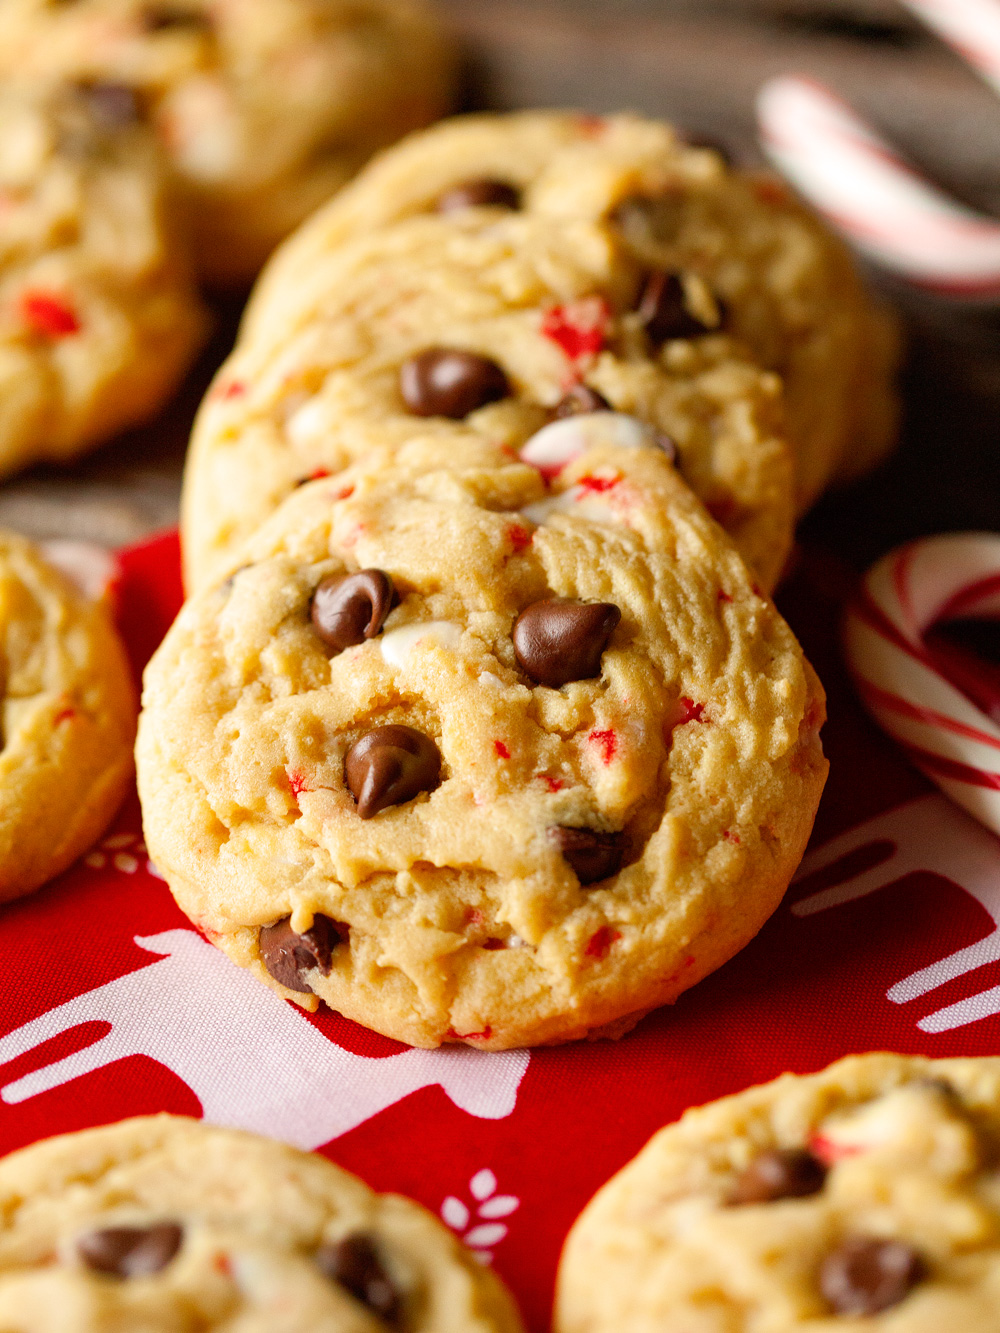 Chocolate candy cane cookies